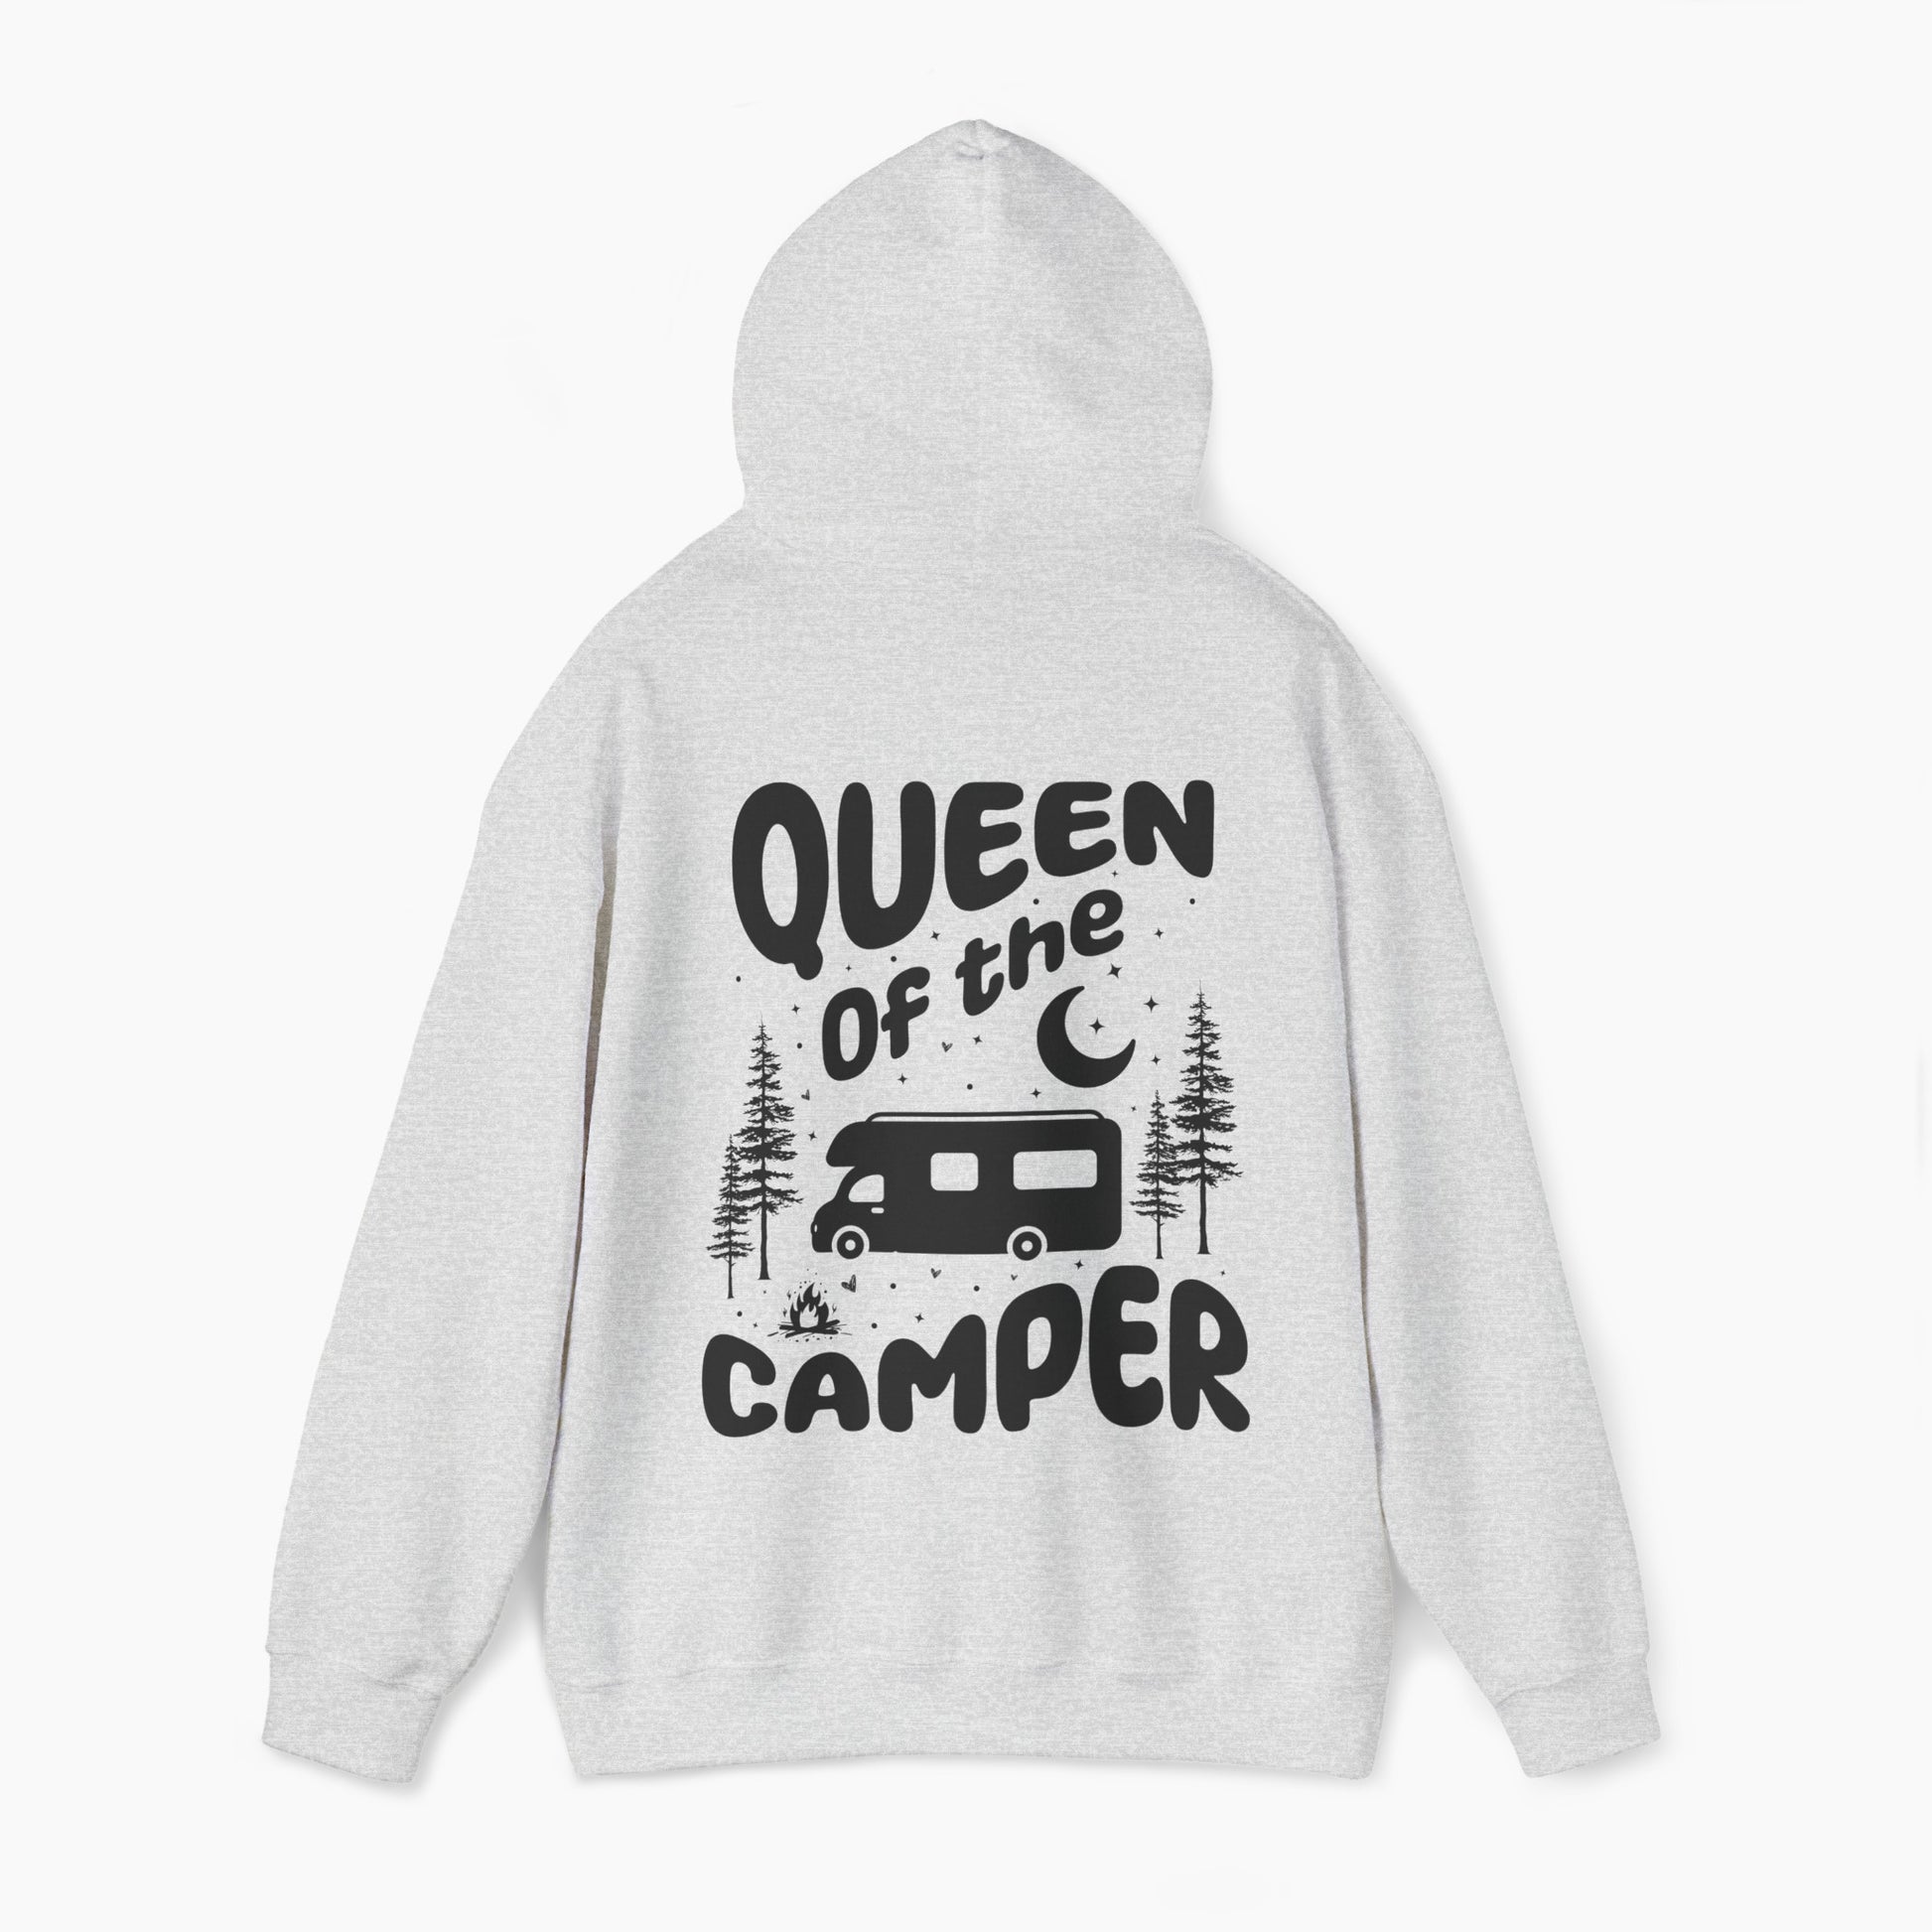 Back of a light grey hoodie with the text 'Queen of the Camper' surrounded by elements including a camping van, stars, trees, and a campfire, on a plain background.